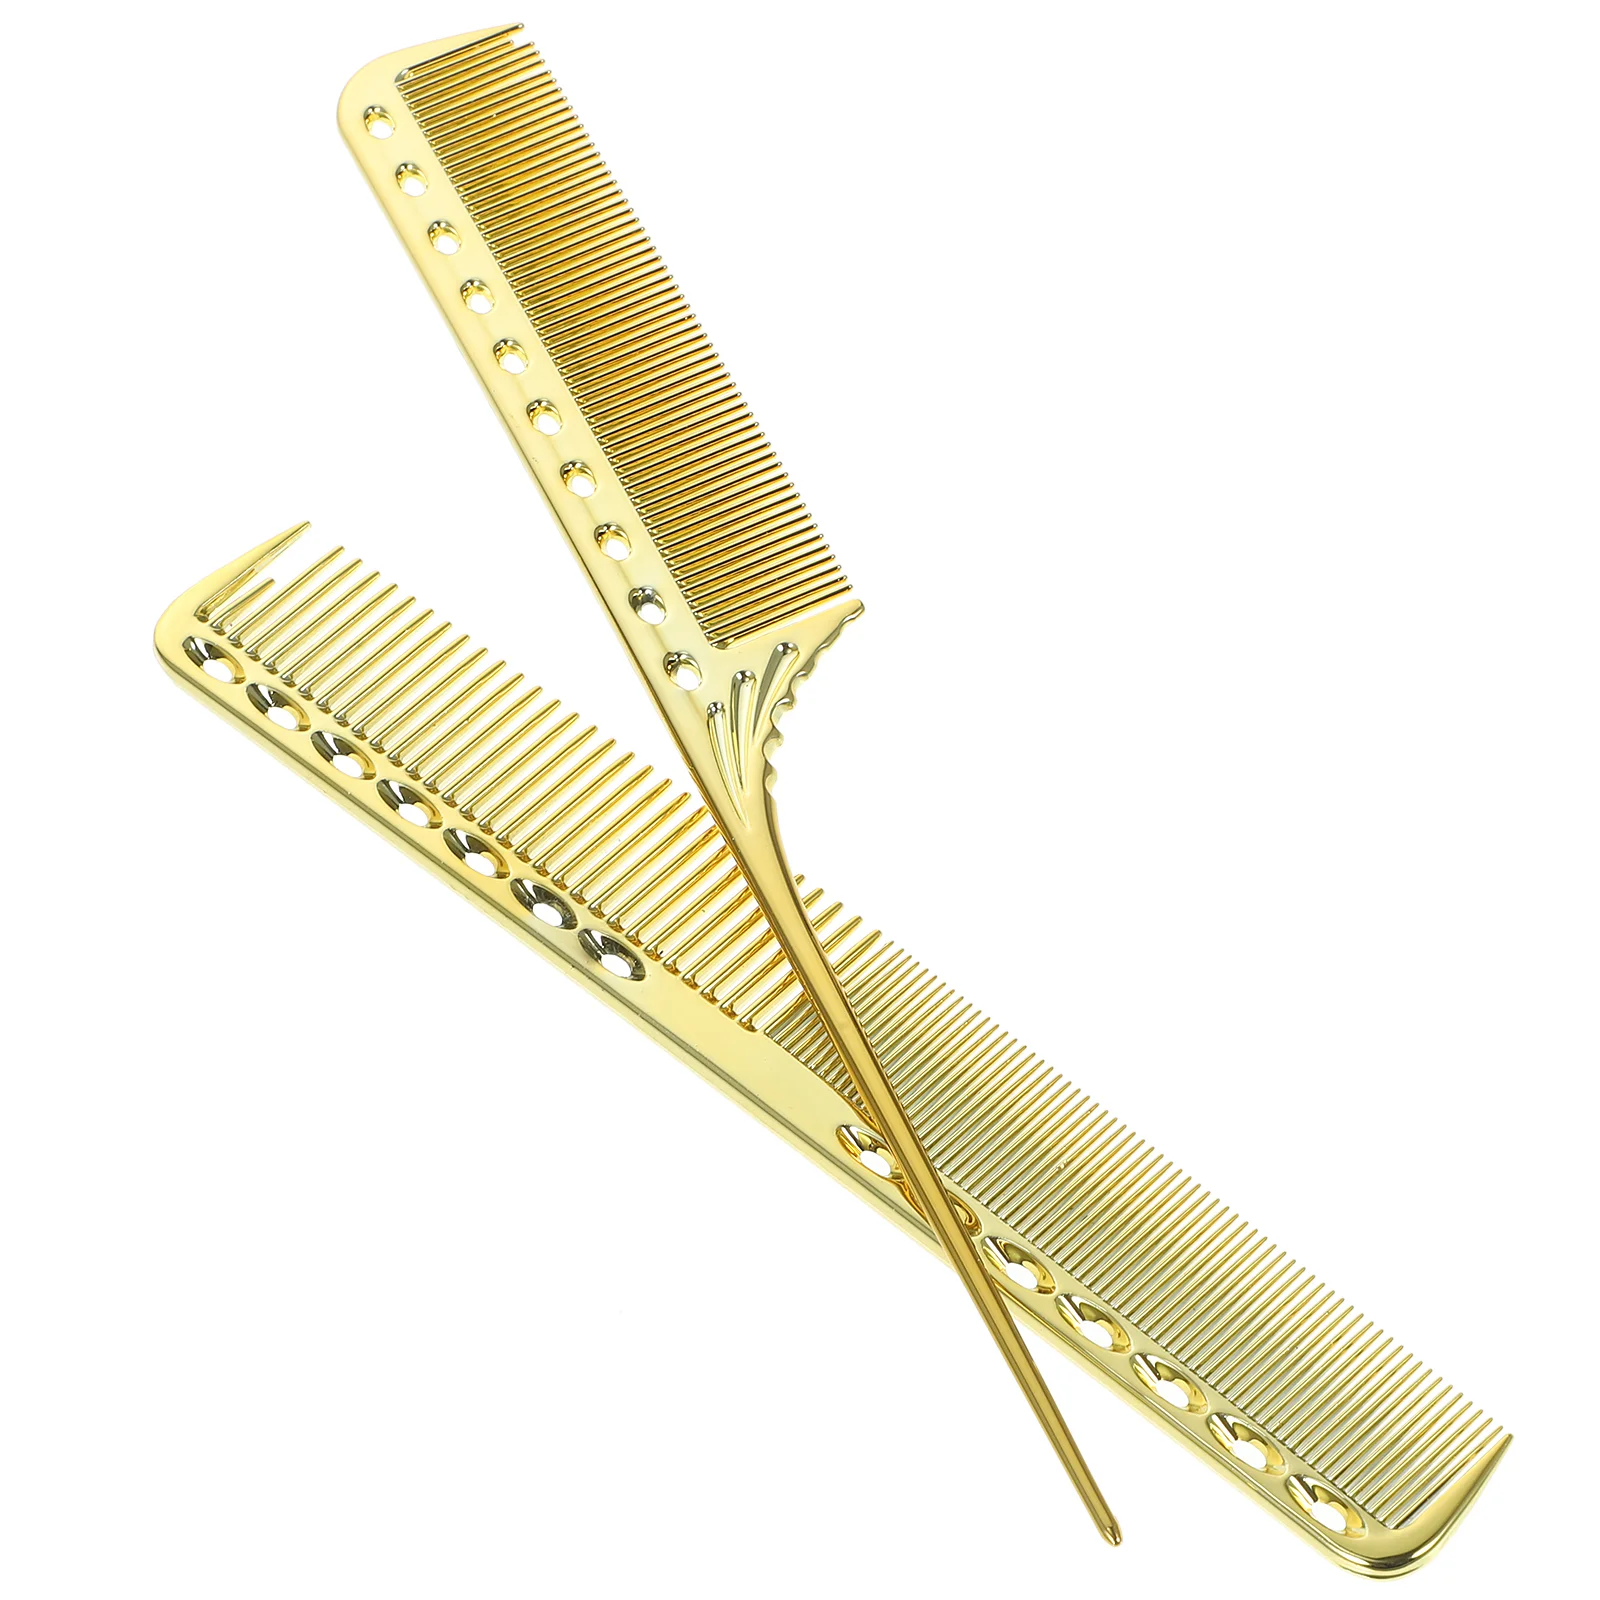 

2 Pcs Vintage Barber Comb Rat Tail Combs for Men Hair Cutting Haircut Styling Hairdressing